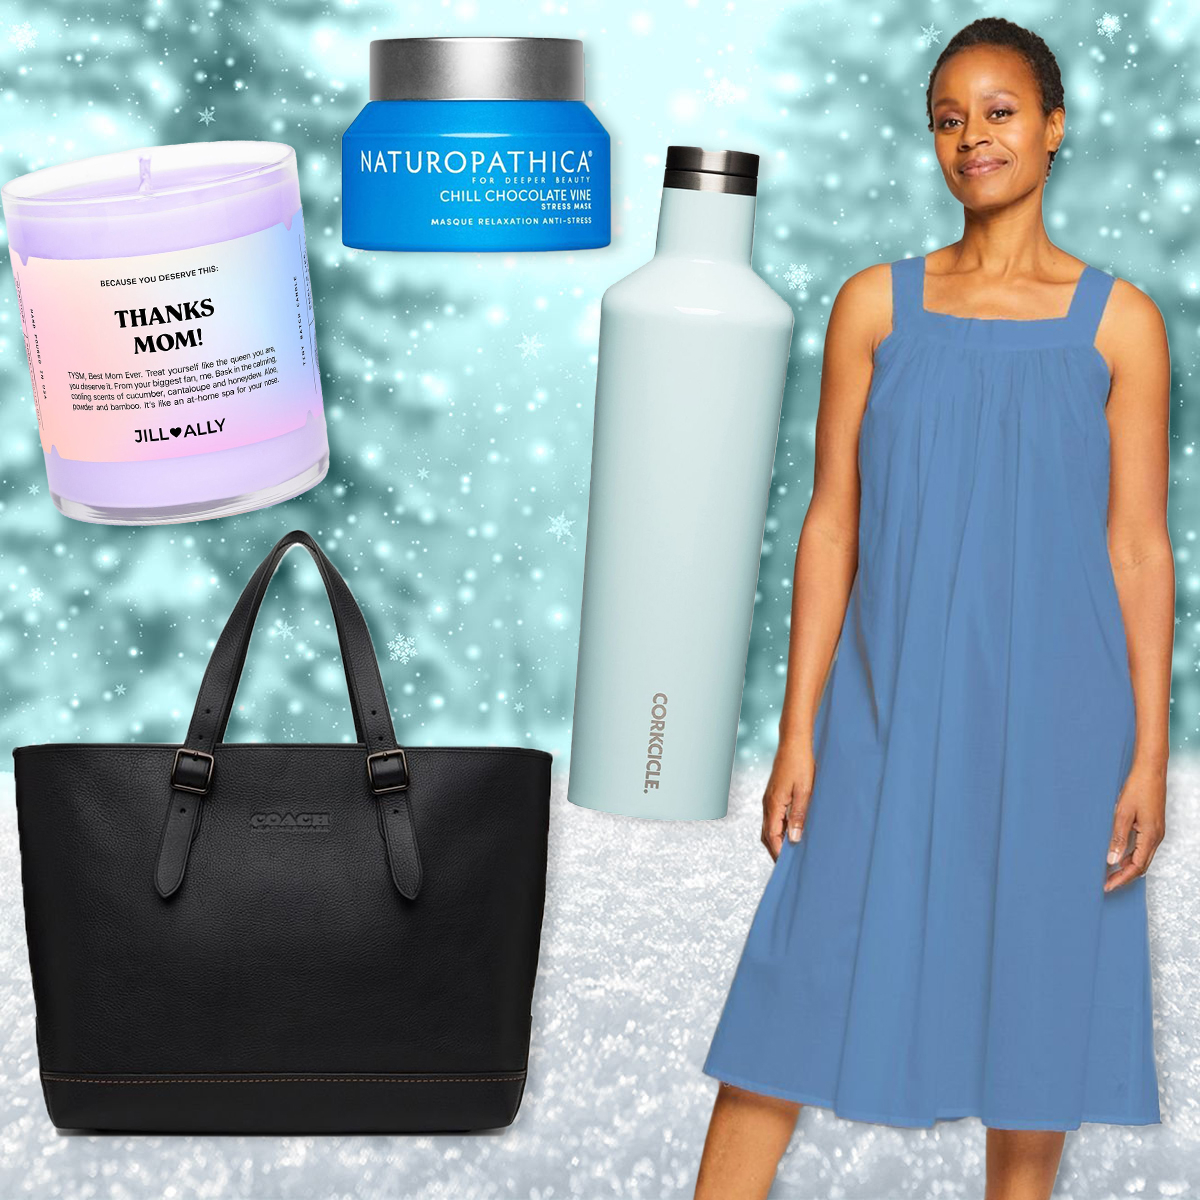 Post-Holiday Gift Guide: Treat yourself